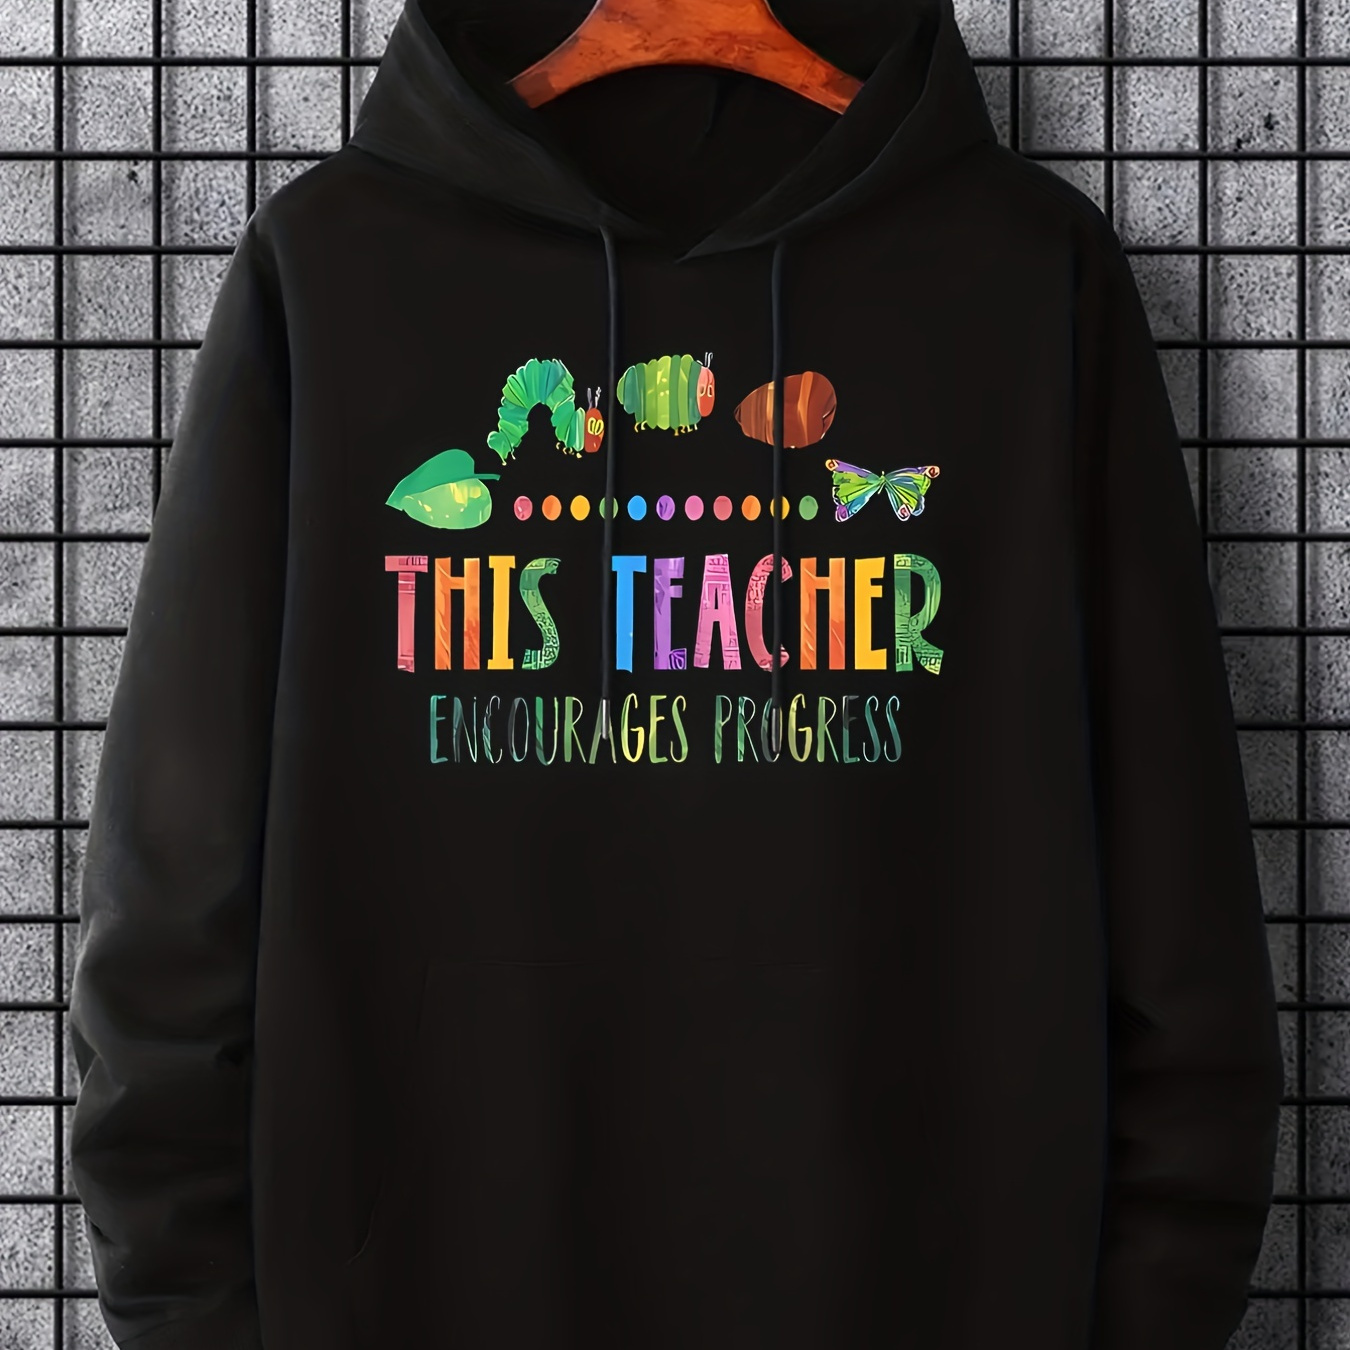 

This Teacher & Caterpillar To Butterfly Print Hoodie, Hoodies For Men, Men’s Casual Graphic Design Pullover Hooded Sweatshirt With Kangaroo Pocket For Spring Fall, As Teacher's Day Gifts